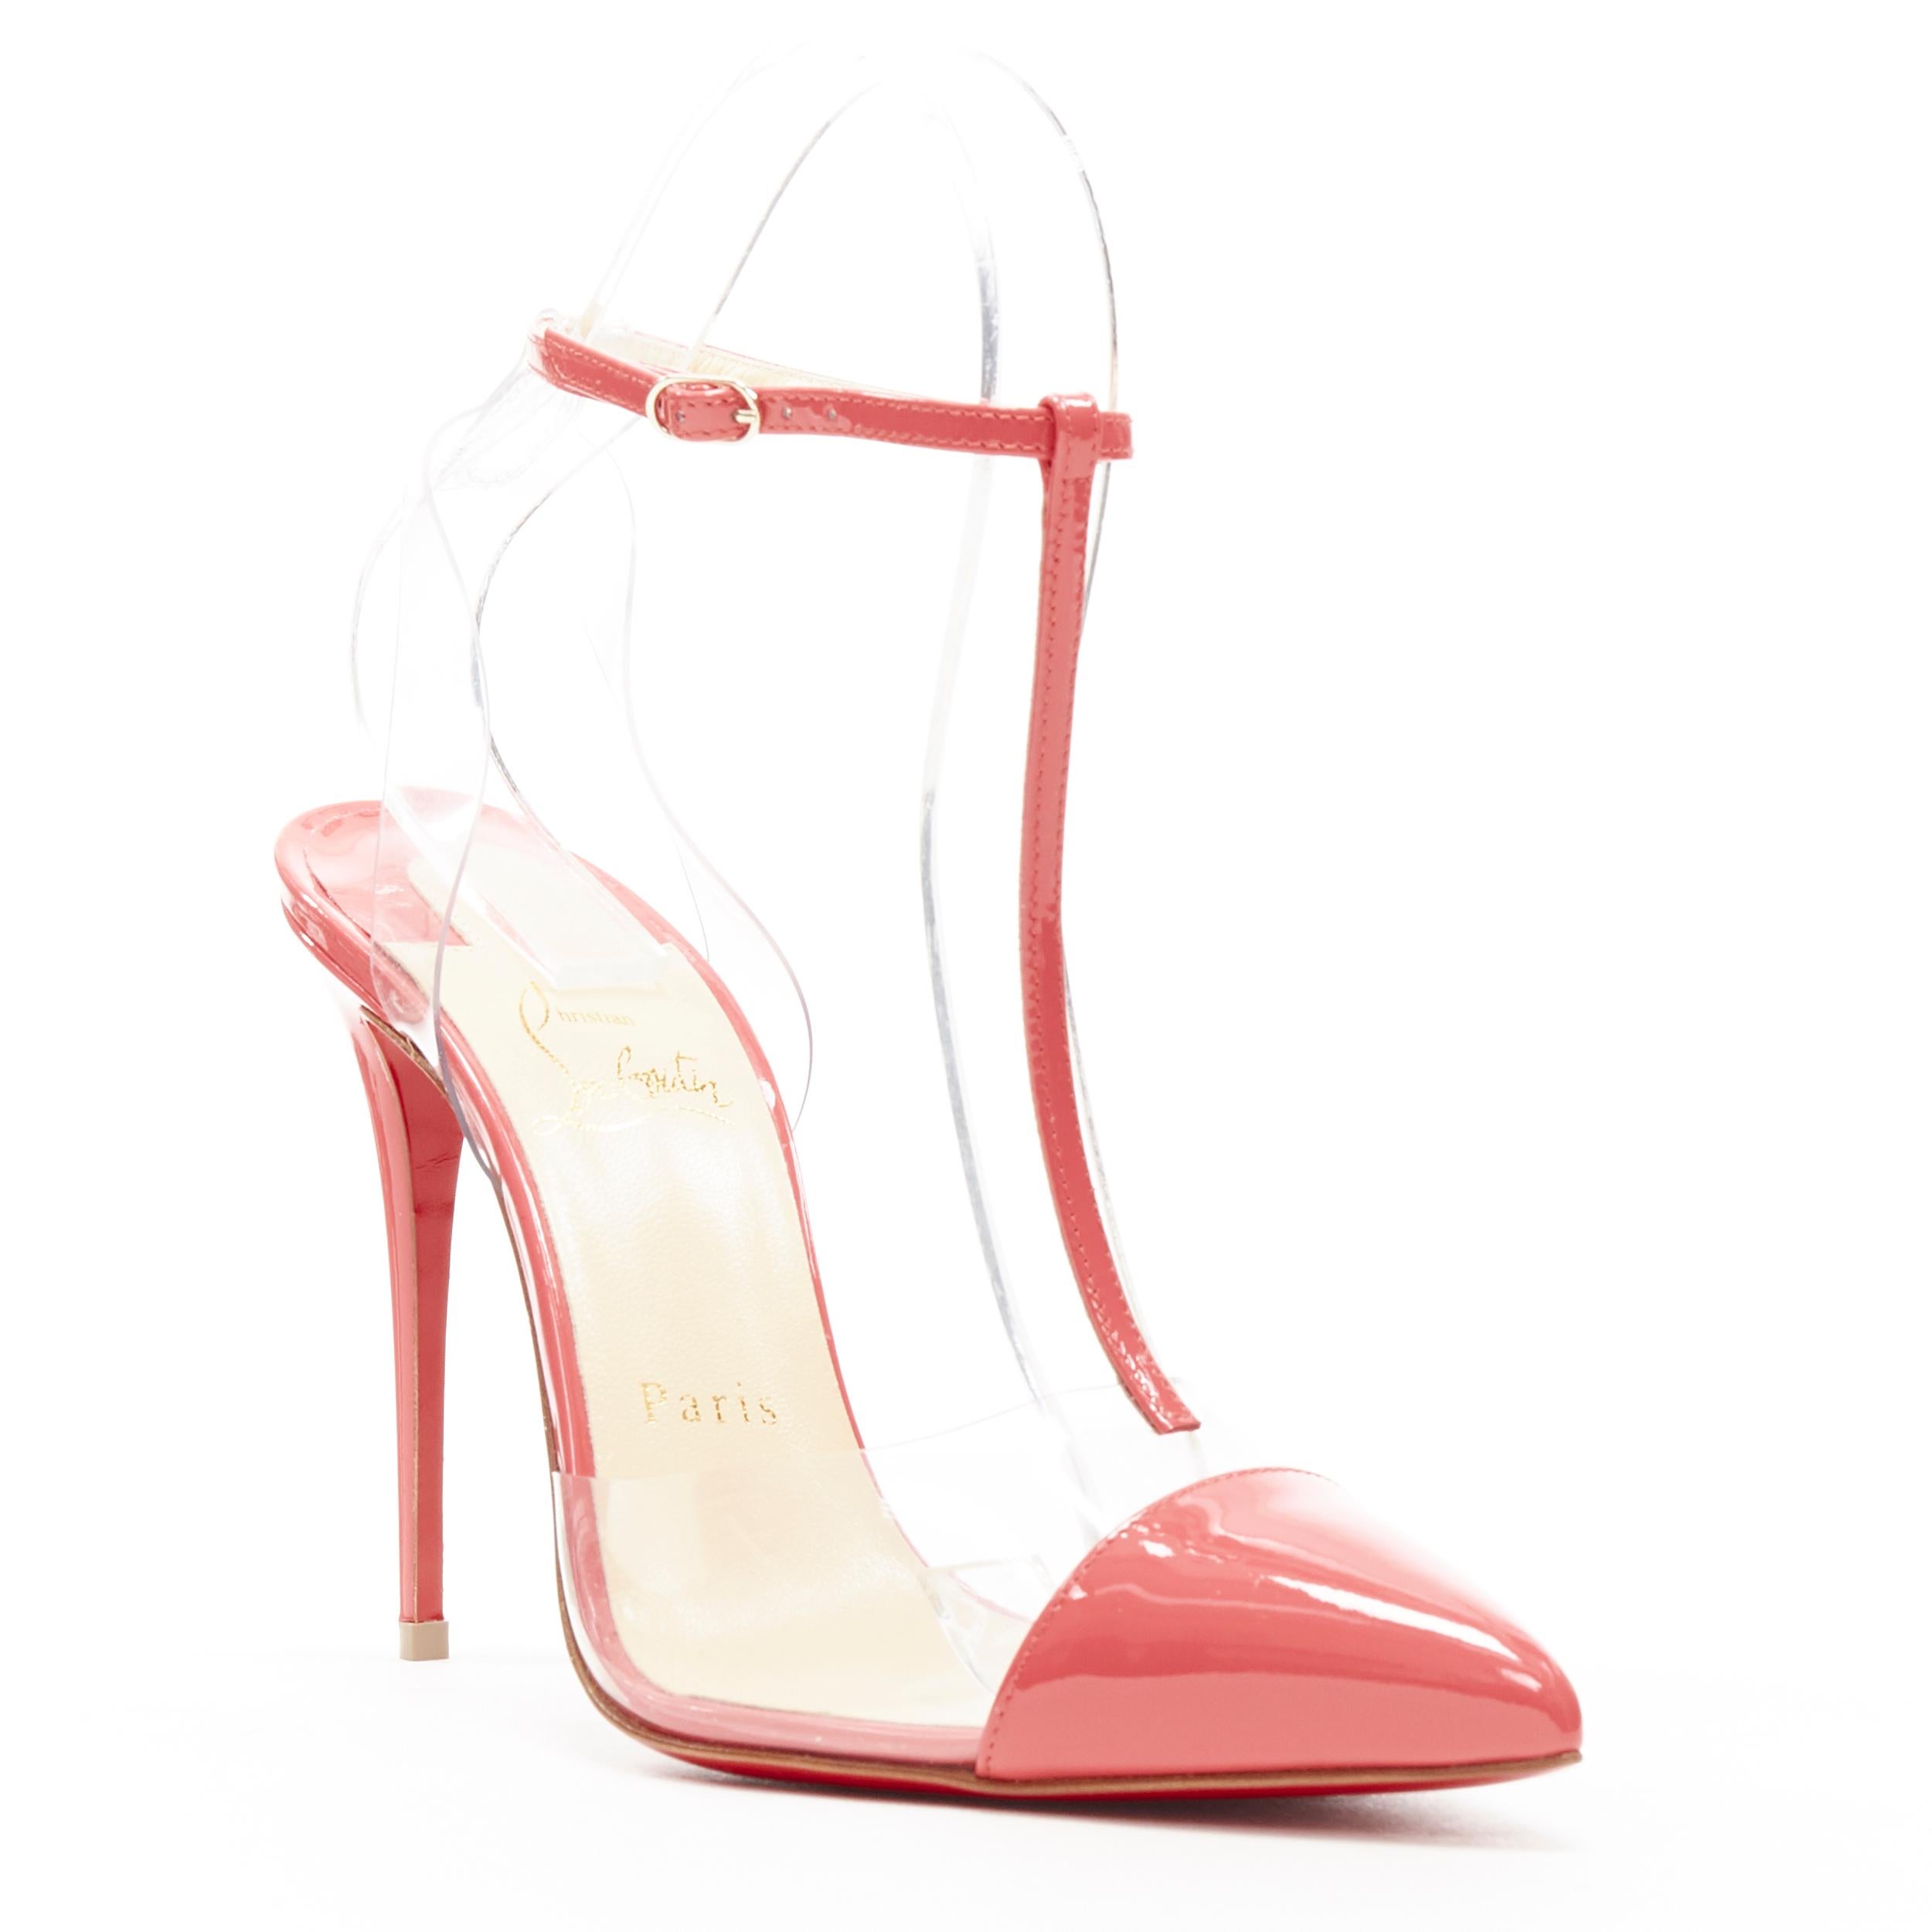 new CHRISTIAN LOUBOUTIN Nosy 100 begonia pink patent PVC T-strap pointy pumps 38
Brand: Christian Louboutin
Designer: Christian Louboutin
Model Name / Style: Nosy 100
Material: PVC
Color: Pink
Pattern: Solid
Closure: Ankle strap
Extra Detail: Style